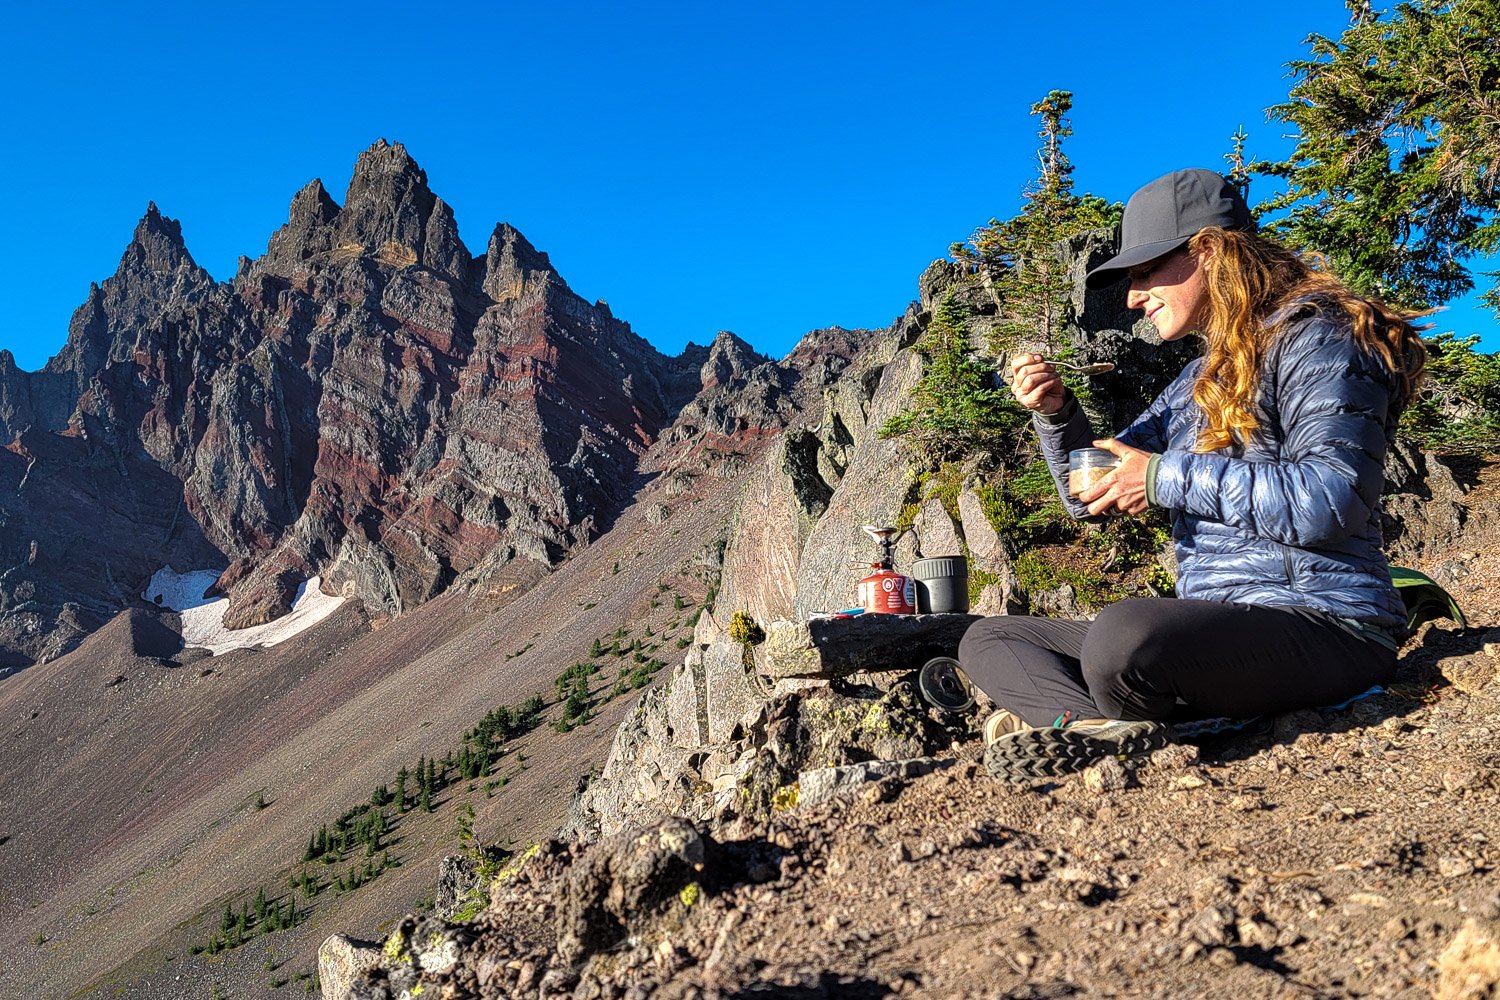 A backpacker eating a meal near a craggy mountain peak